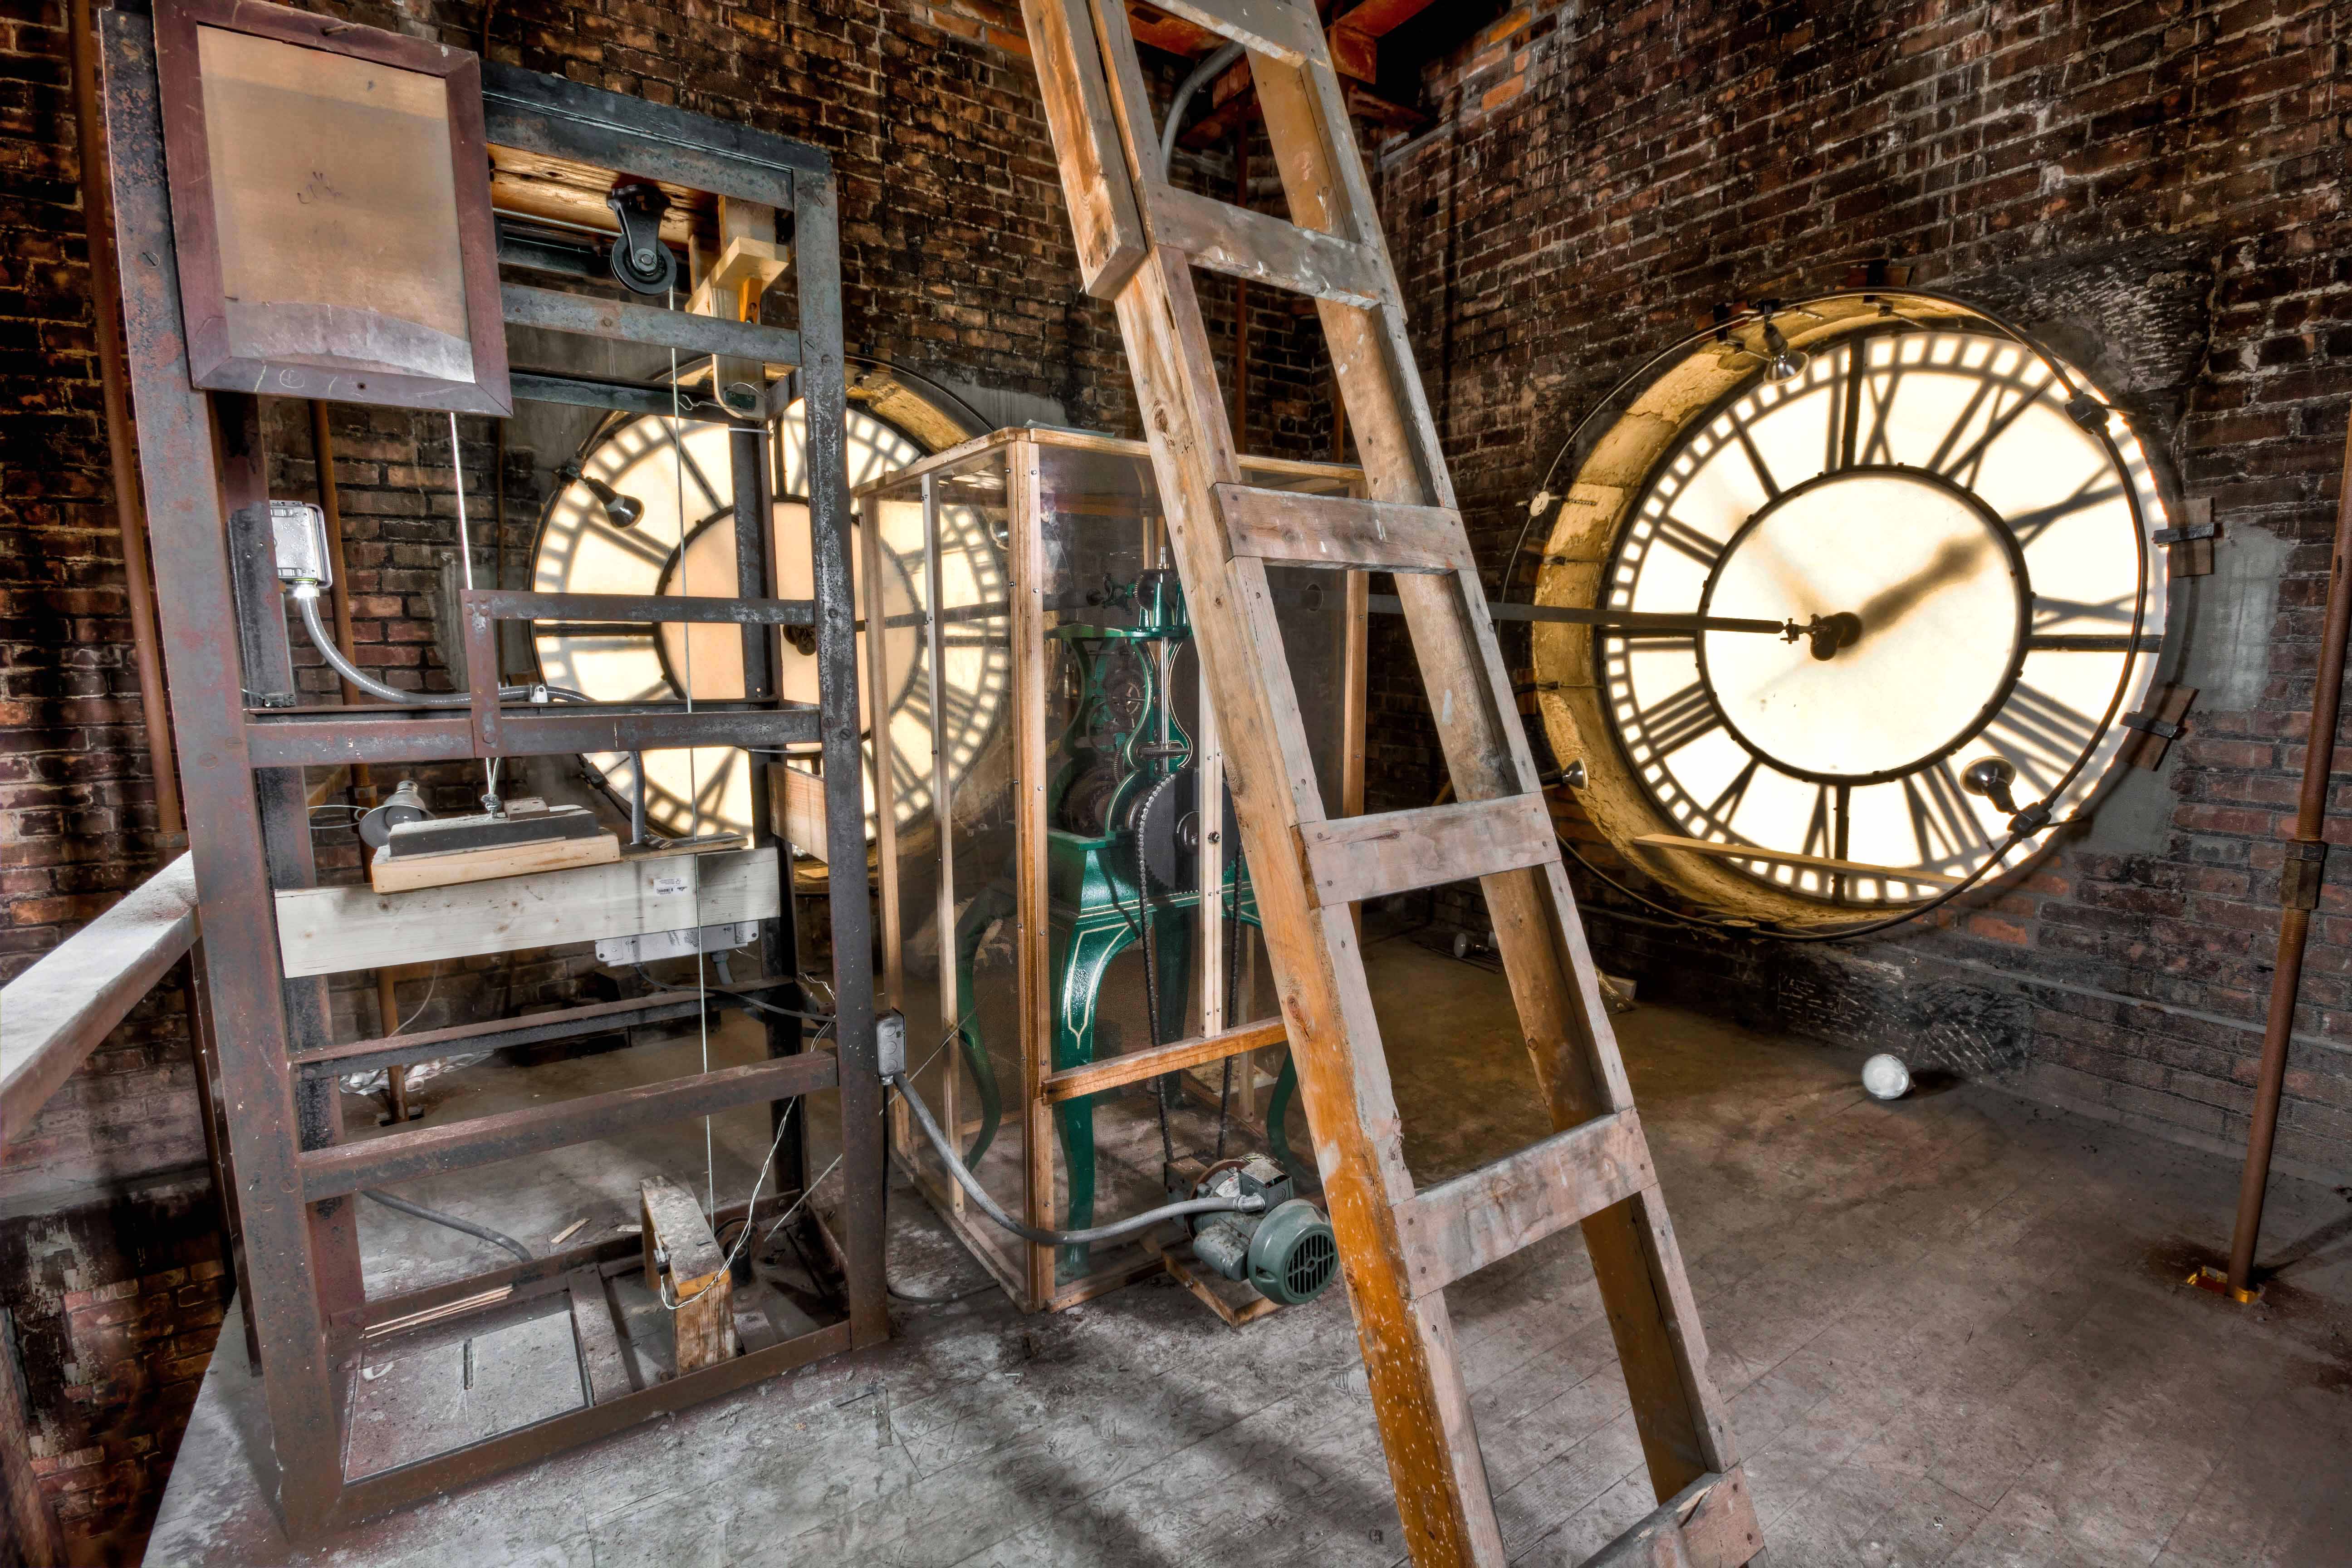 Inside the Clock Tower